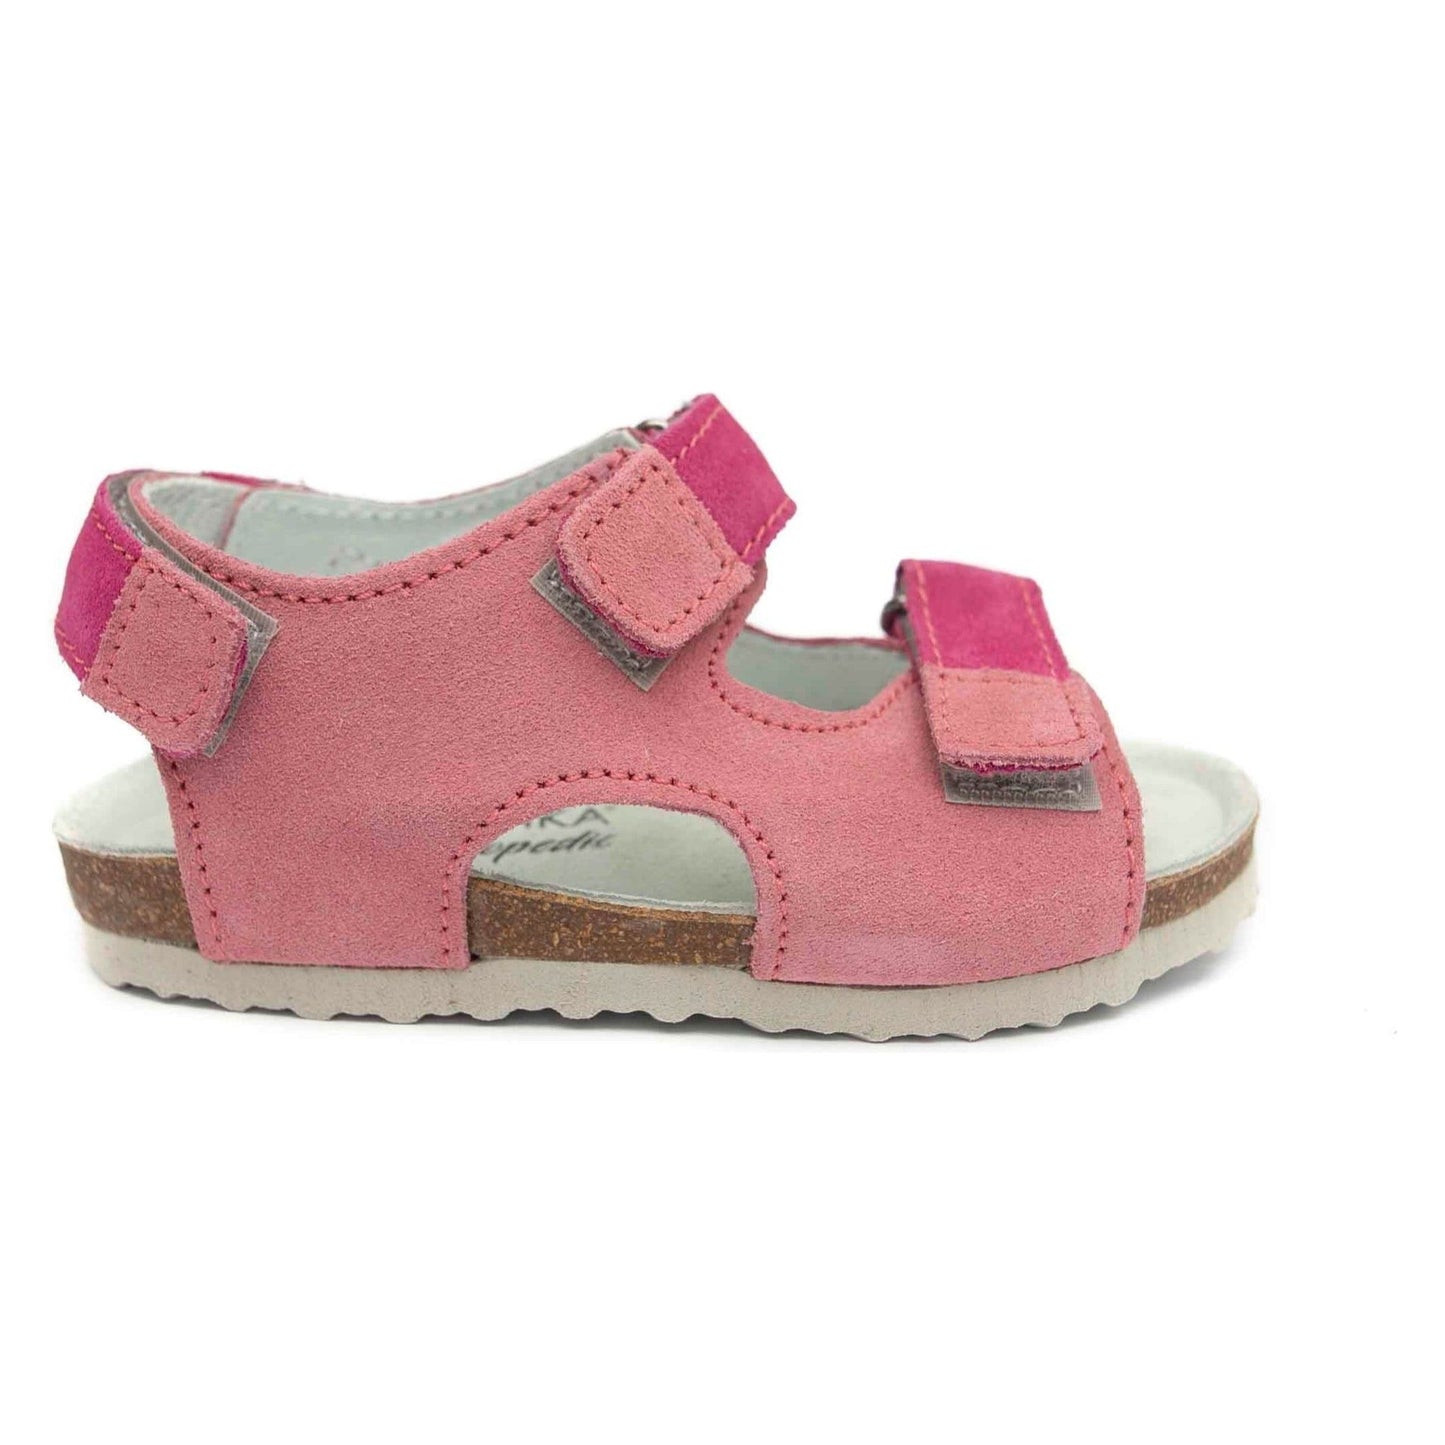 Cork orthopedic sandals for older girls, PROTETIKA brand. High arch support, deep heel foot bed, genuine leather insole.